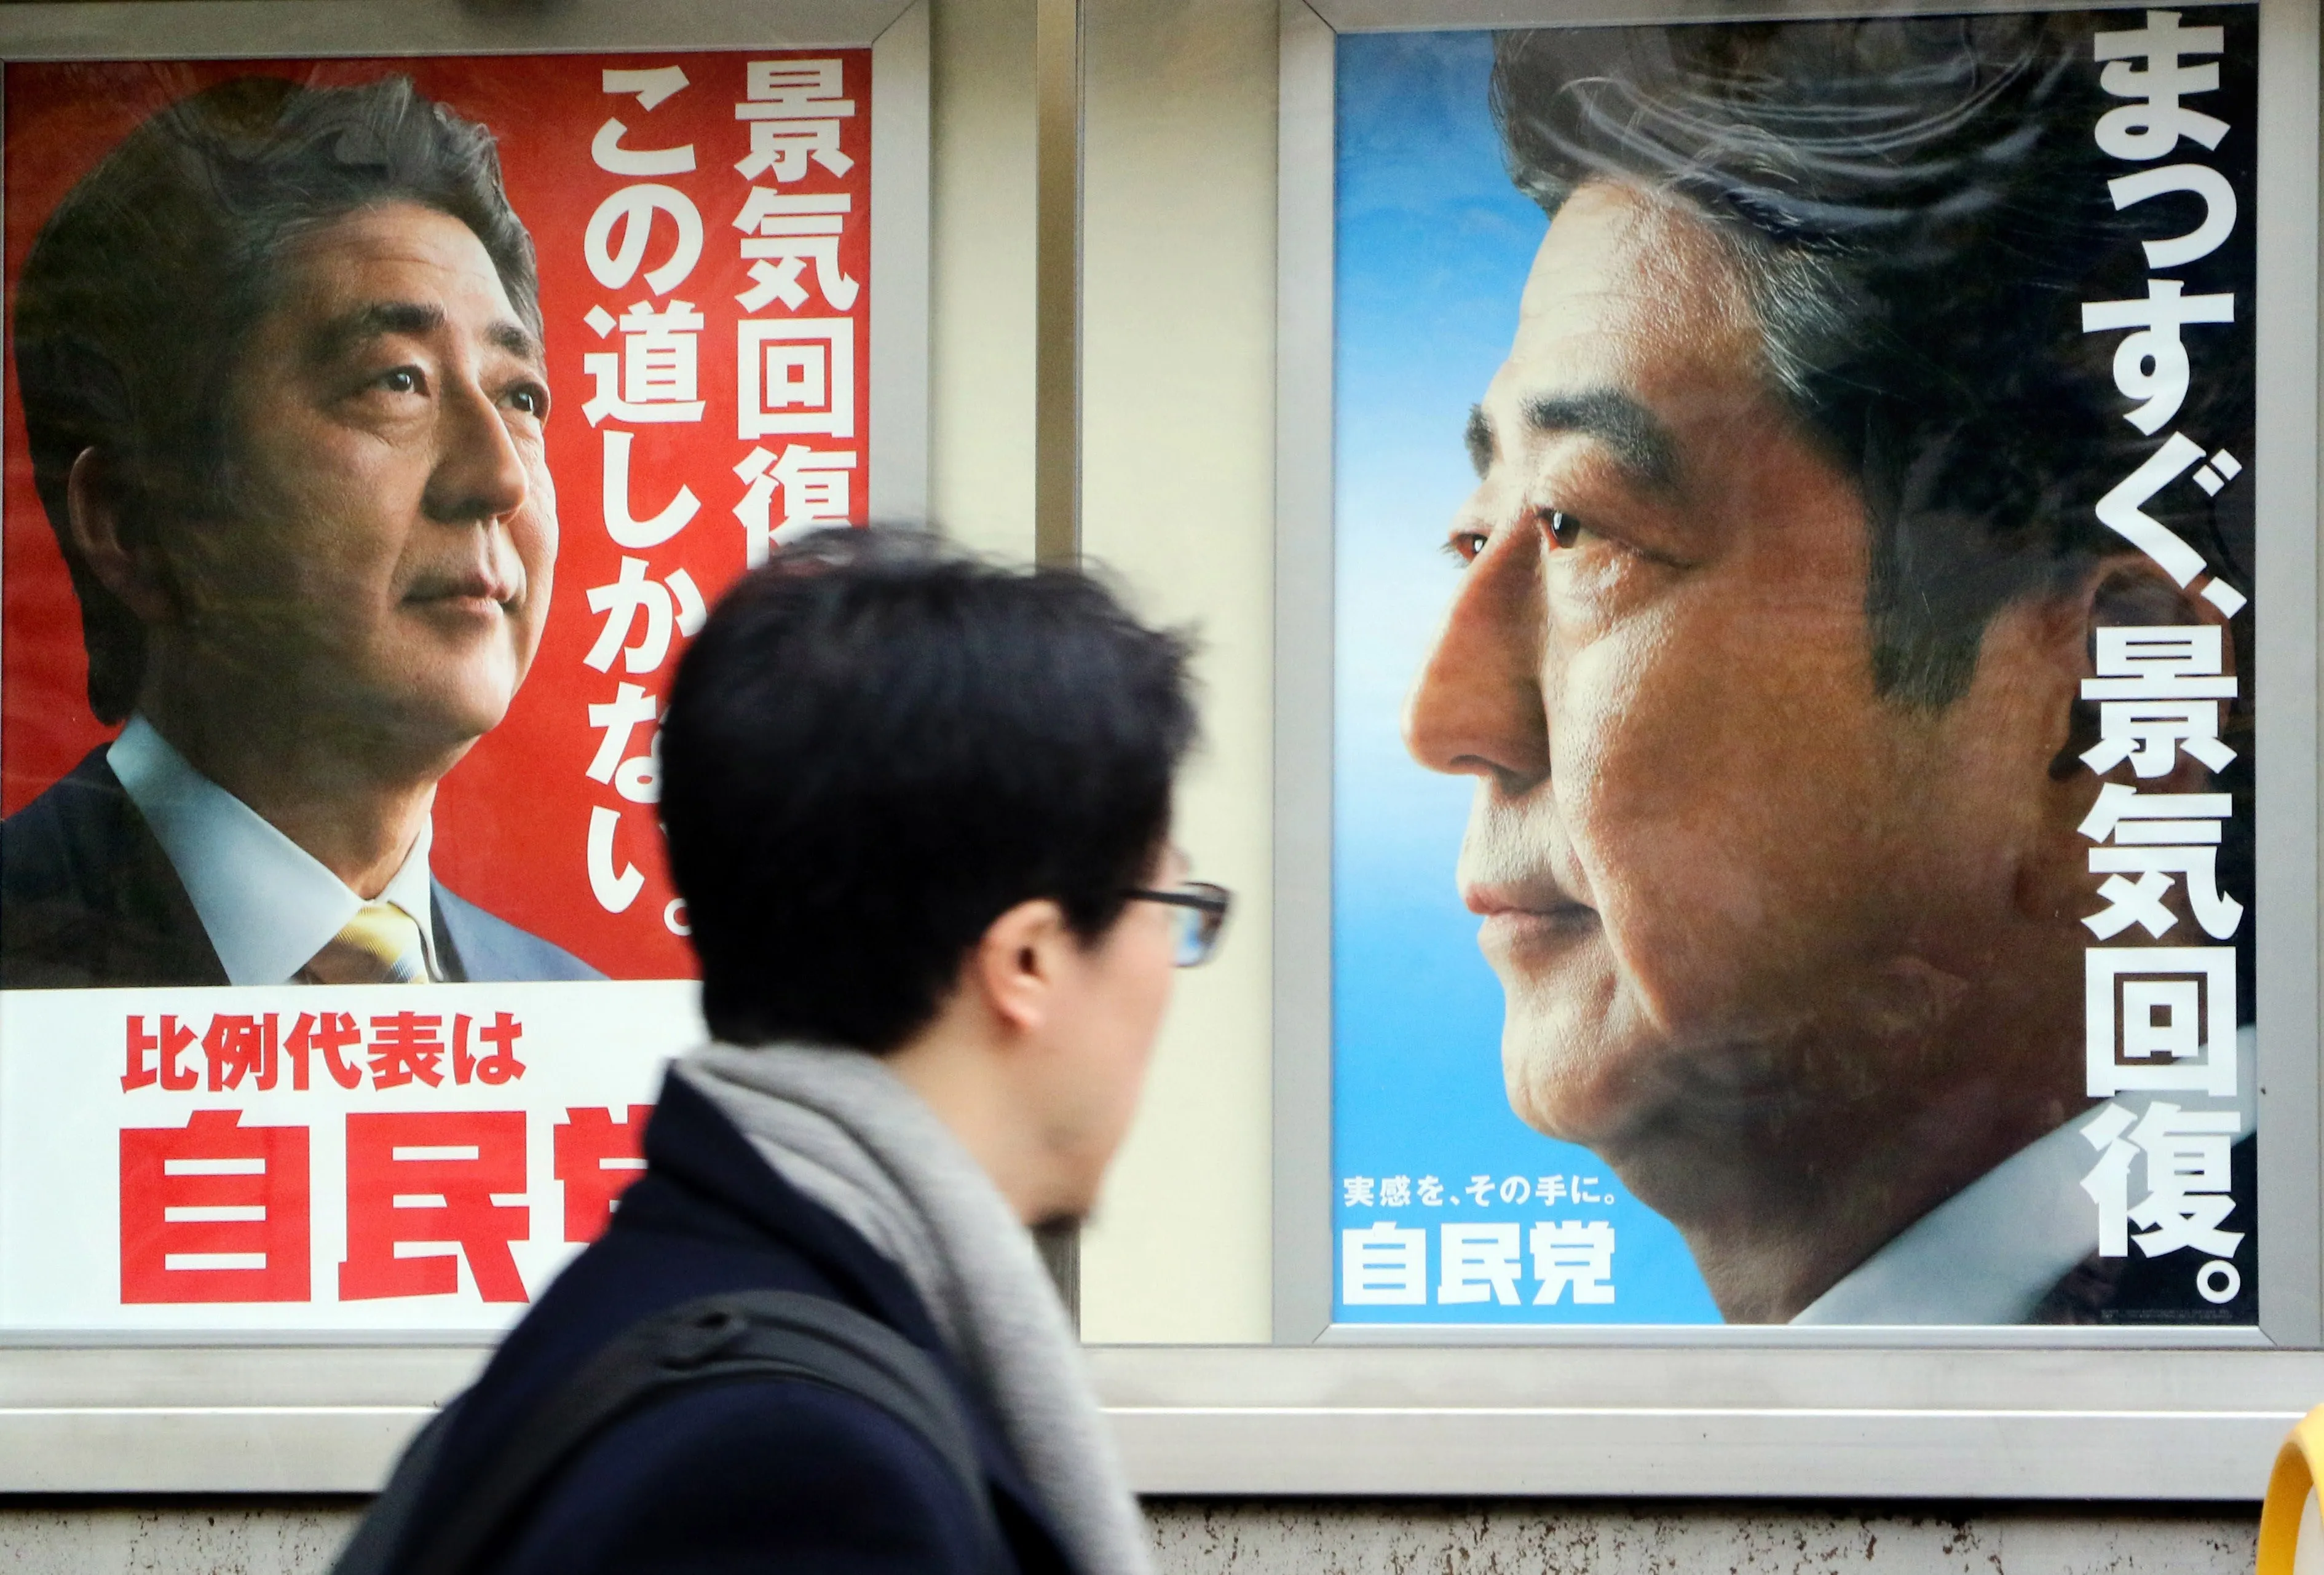 How real is Japan’s new strategic dawn?